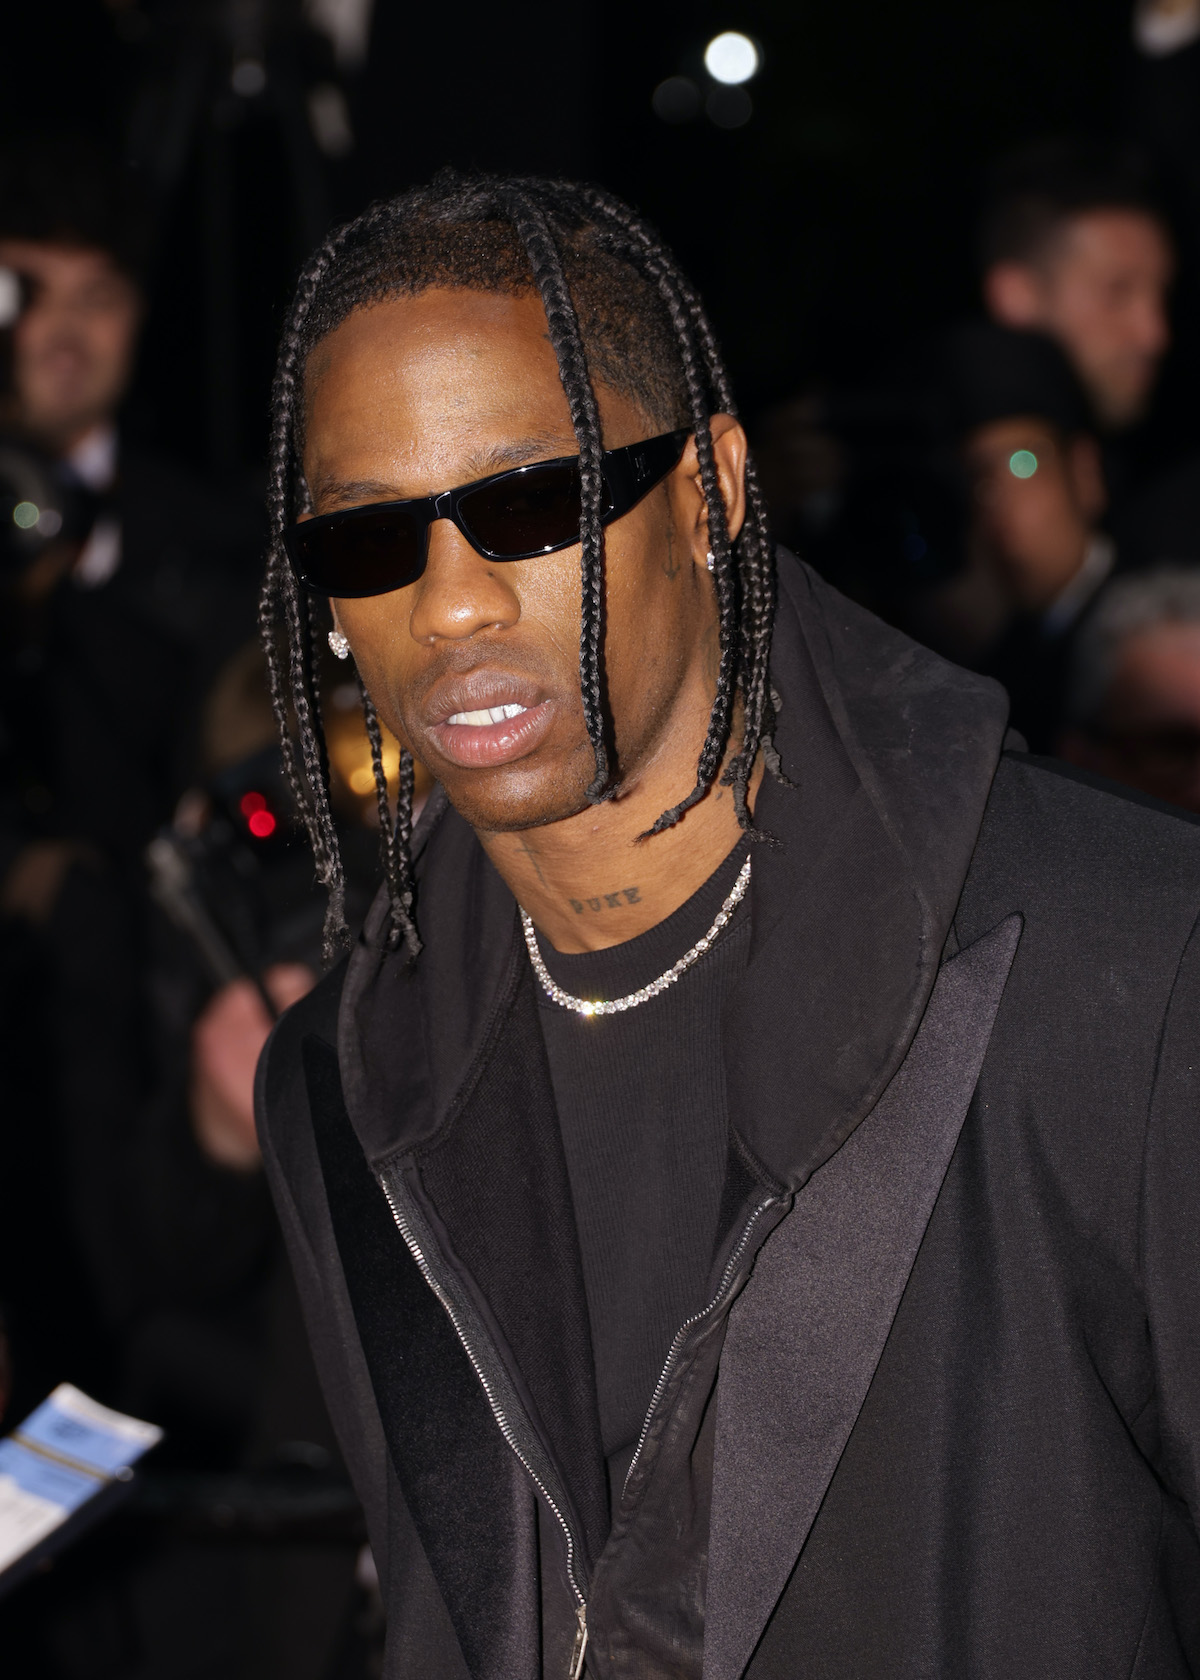 SPOTTED: Travis Scott Attends “The Idol” Red Carpet at Cannes Film Festival  Wearing Unreleased Nike Collaboration – PAUSE Online